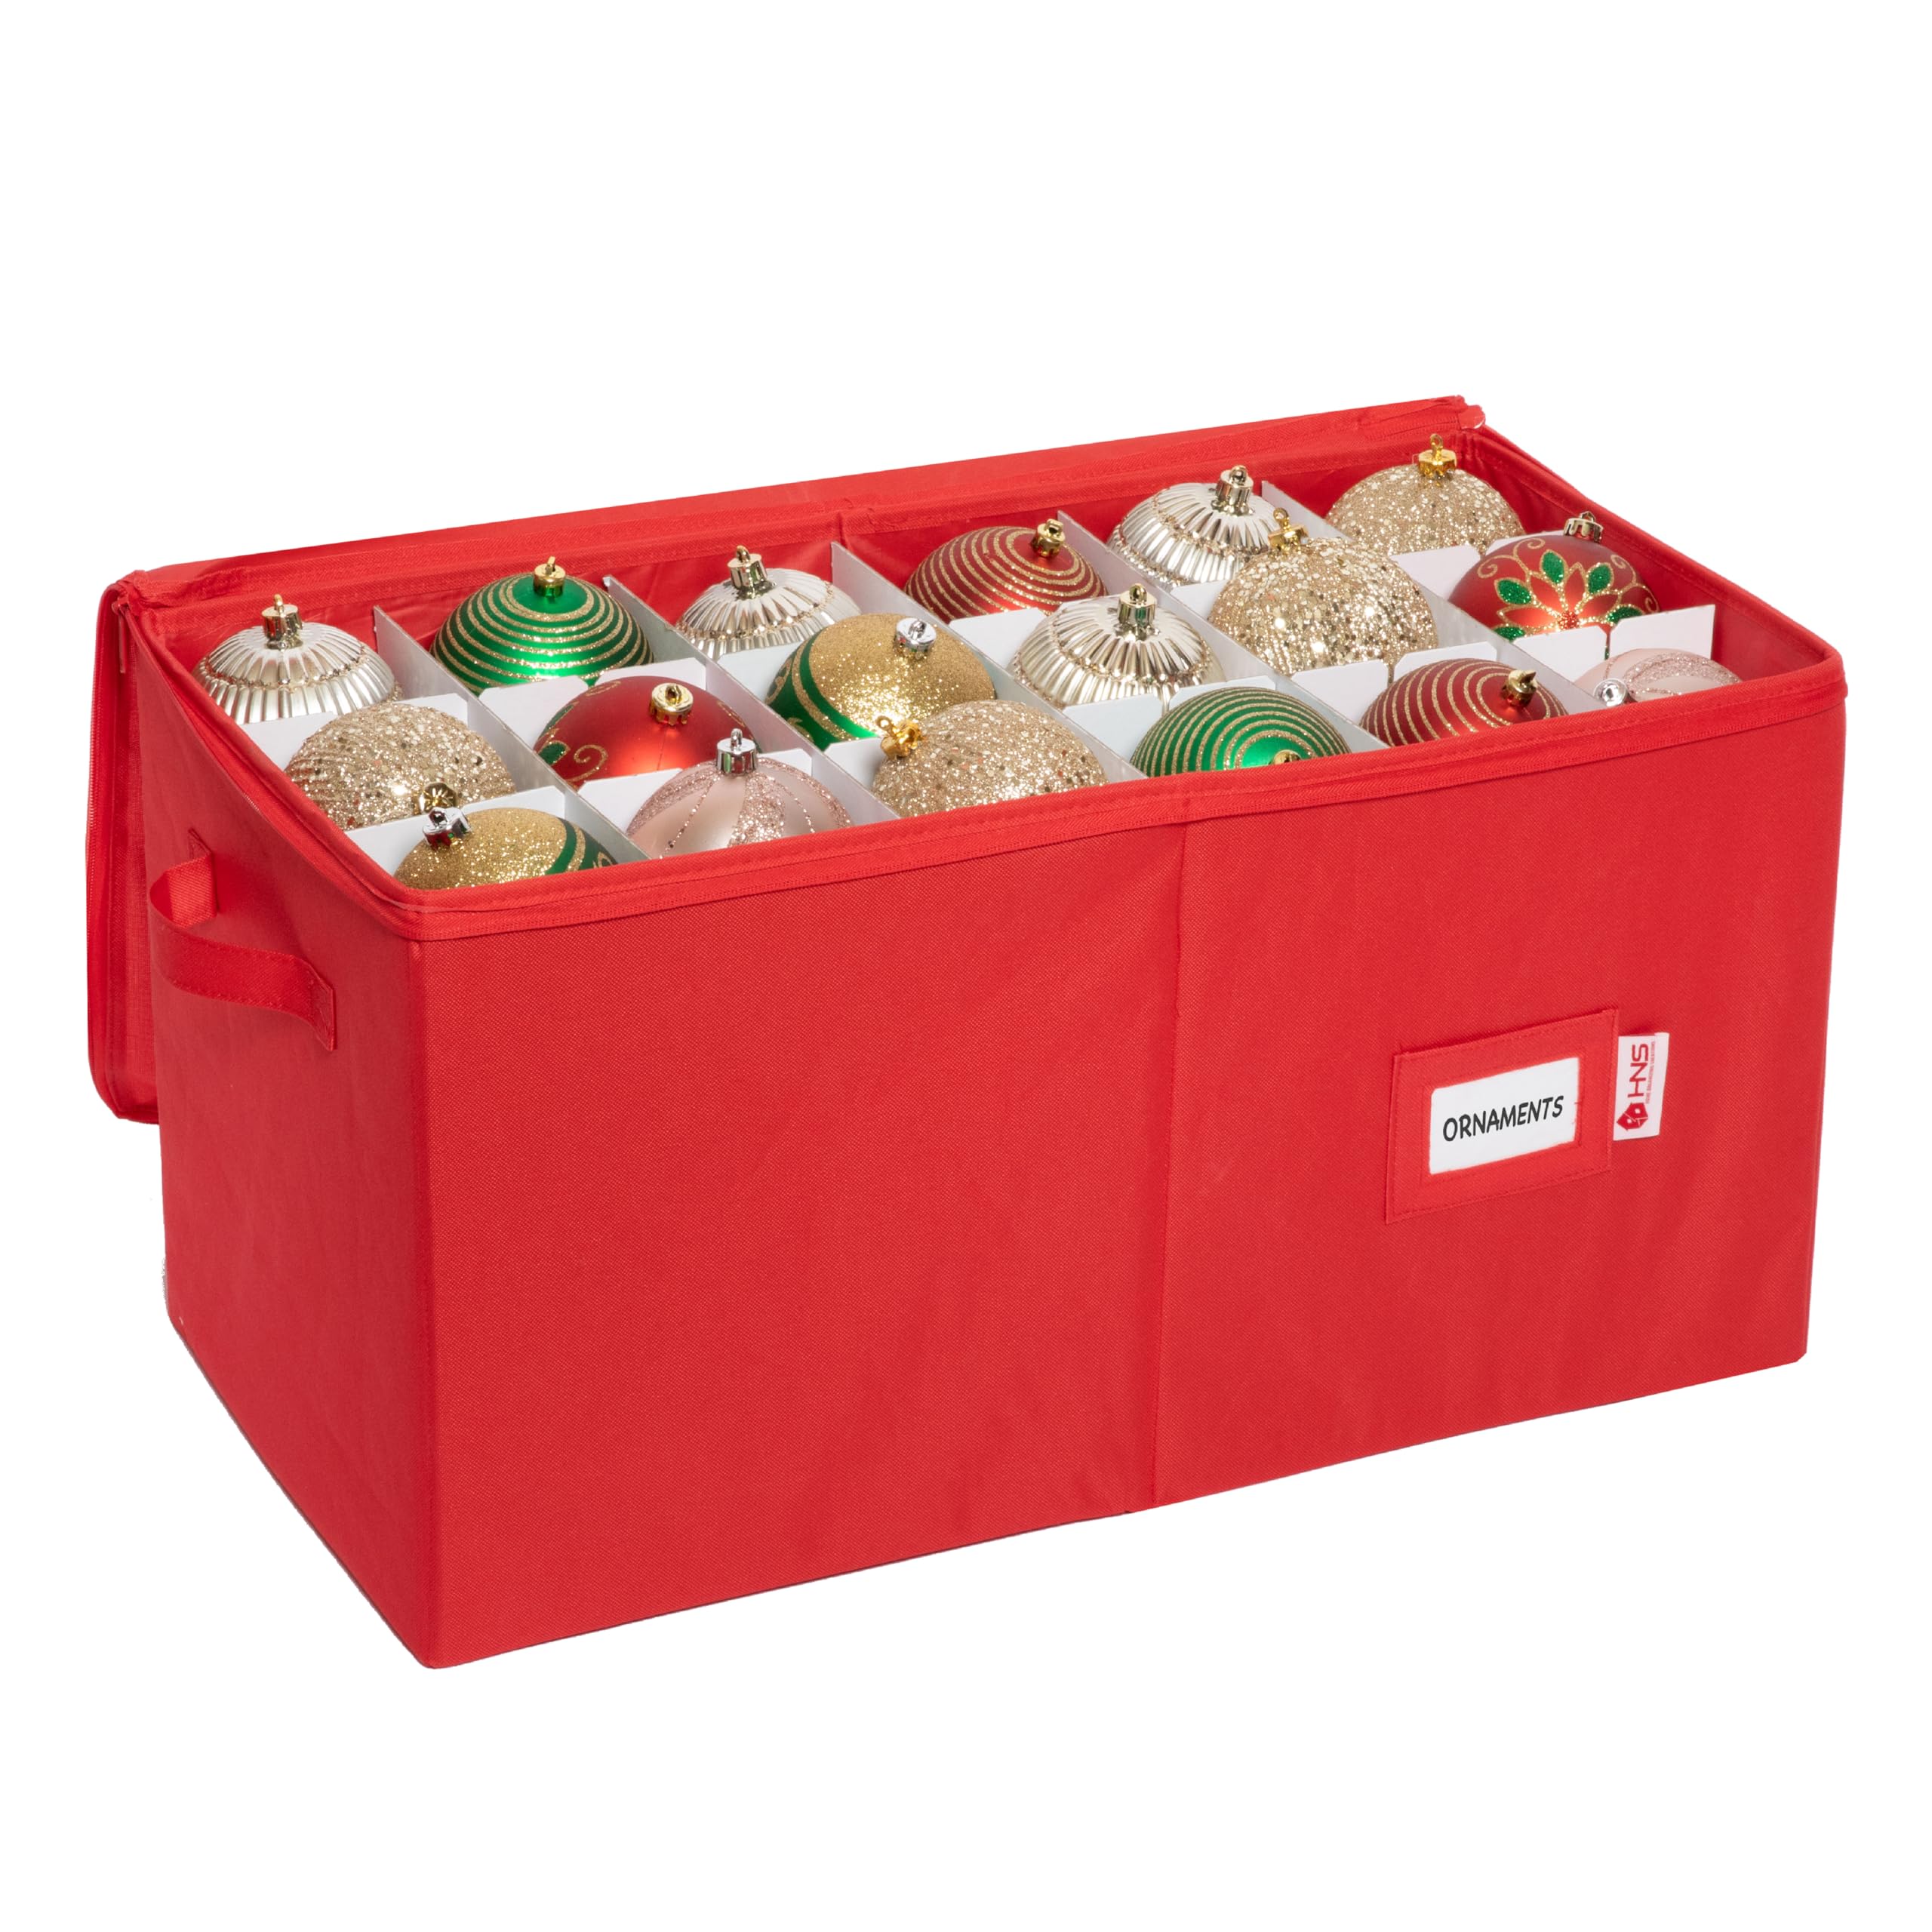 Christmas Ornament Storage Container with Dividers -Box Stores Up to 54-4" Ornaments, Zippered, Convenient, Adjustable, Heavy Duty 600D, Large Organizer Bin to Protect and Store Holiday D�cor (Red)  - Acceptable